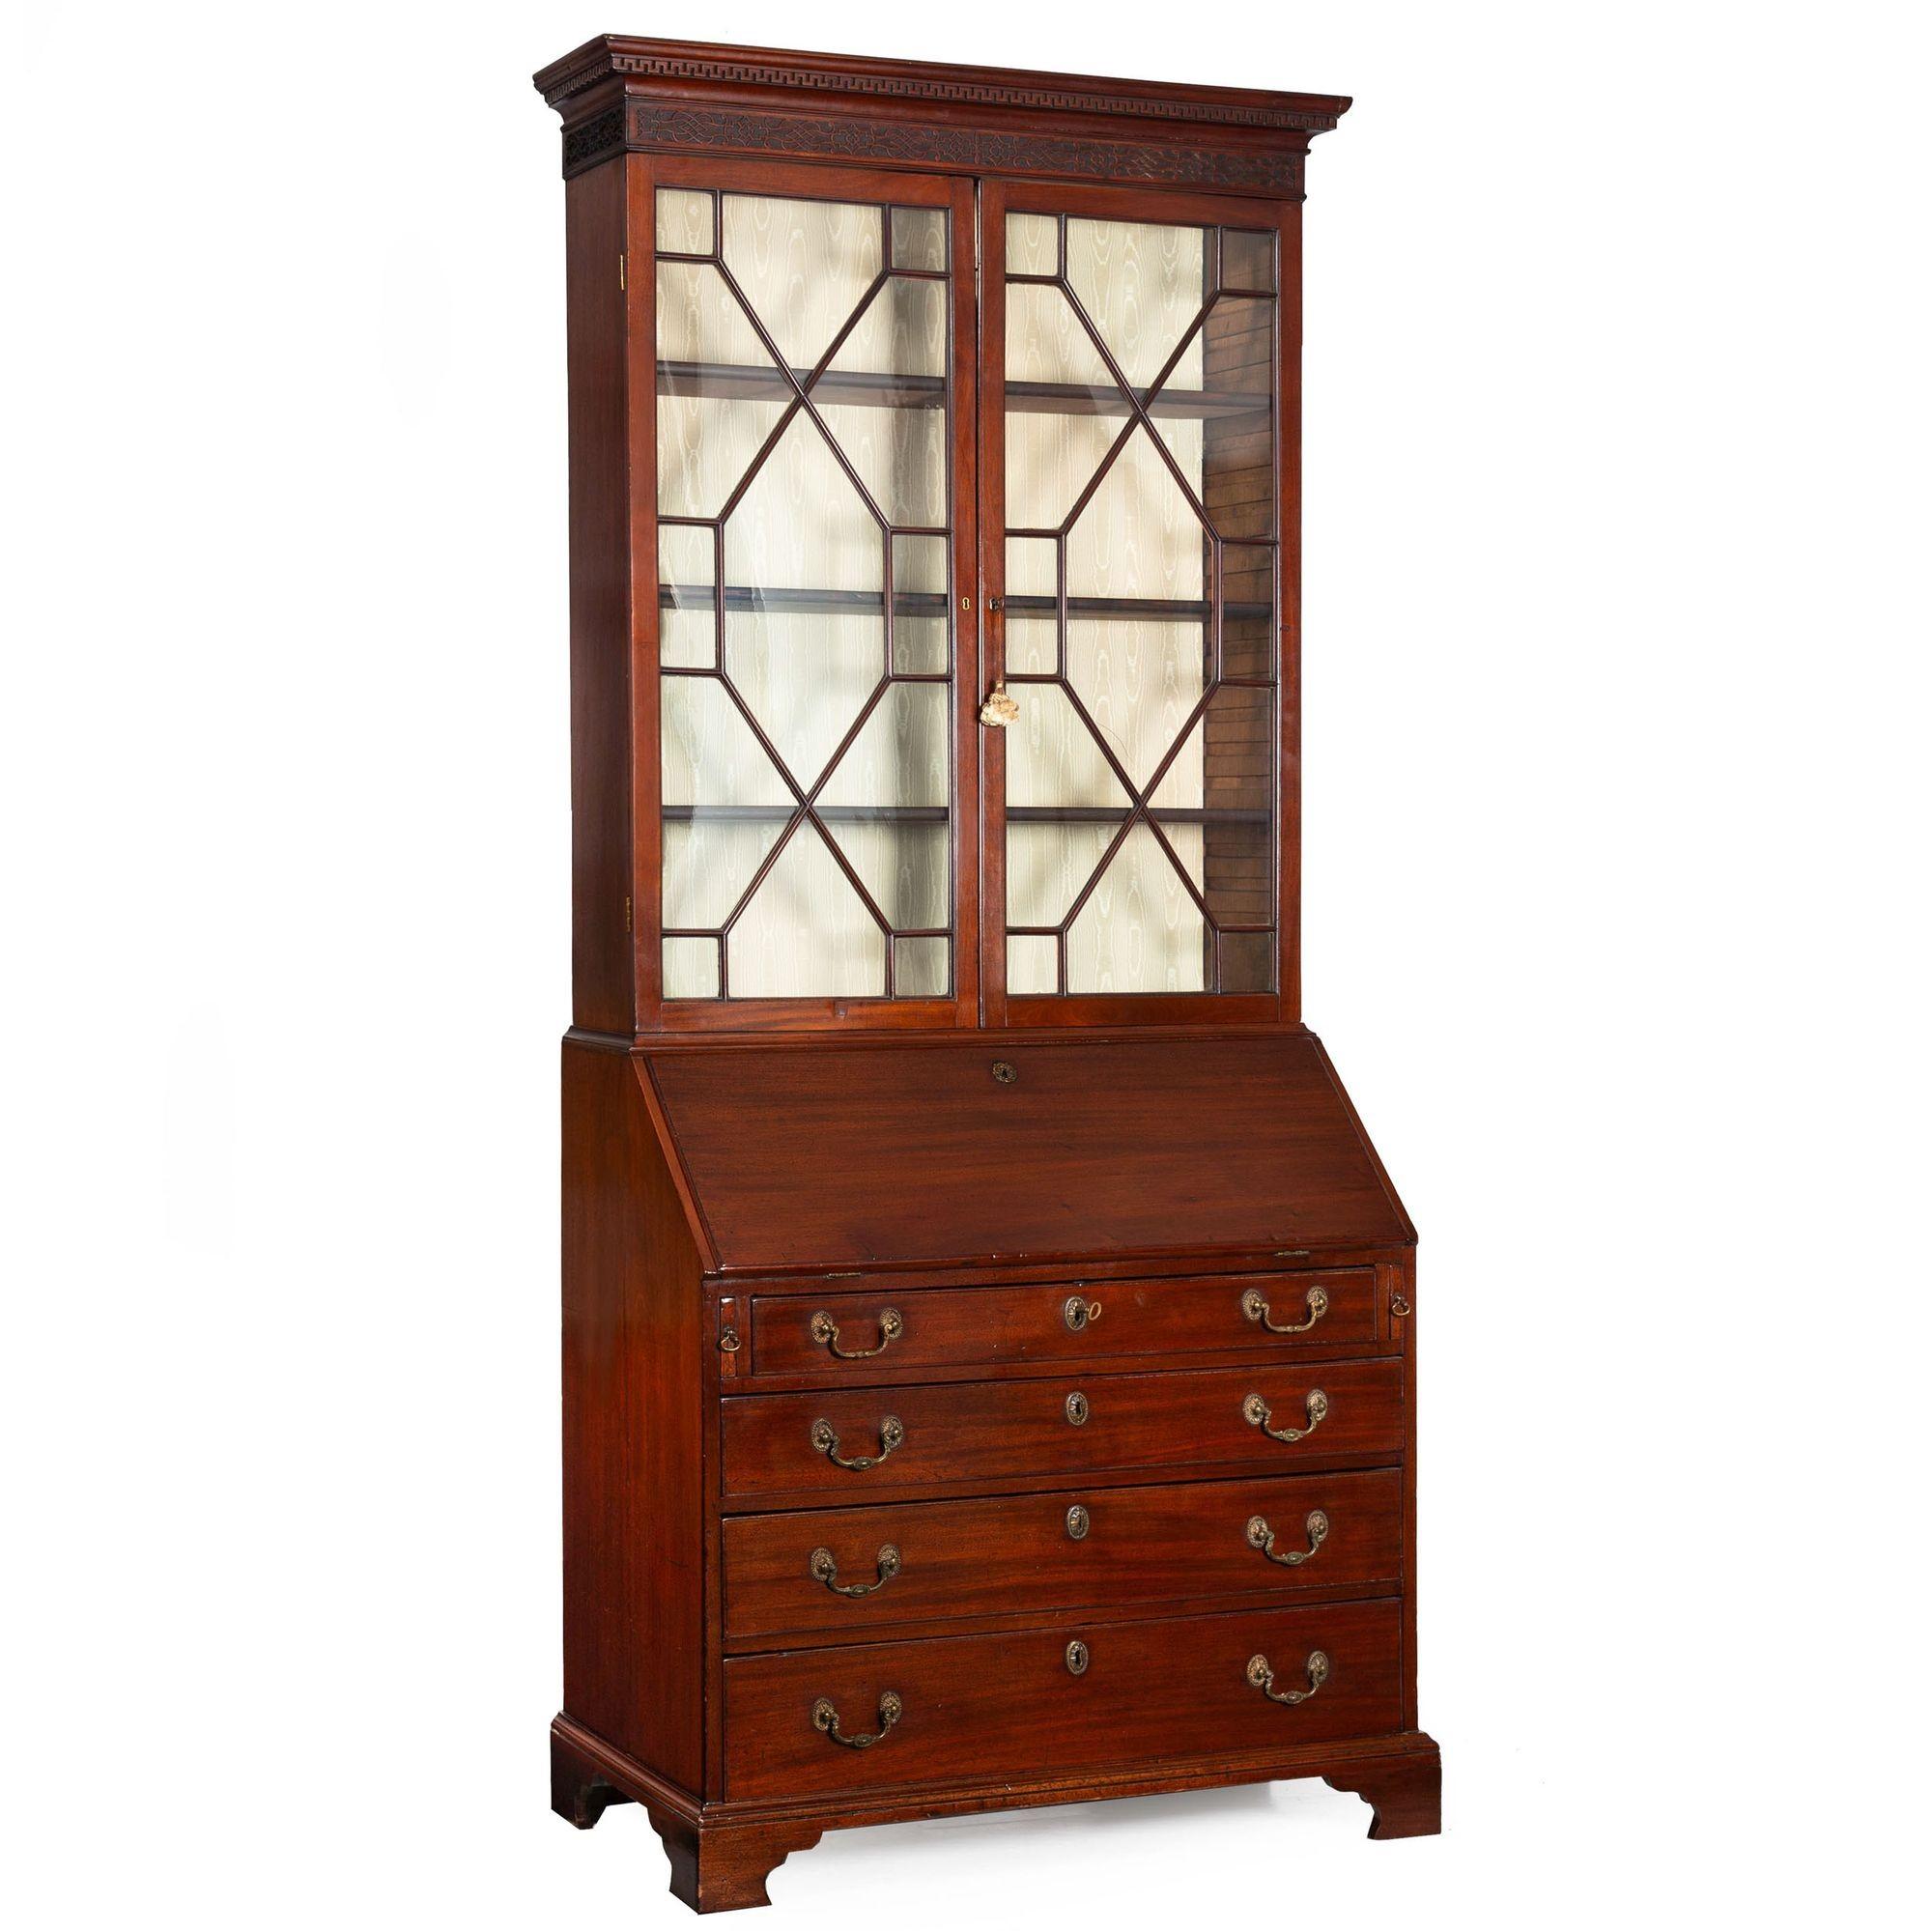 GEORGE III MAHOGANY SECRETARY DESK WITH GLAZED UPPER BOOKCASE
England, circa 1780  formerly with Ginsburg & Levy
Item # 401HYF25Q

A rich and vibrant secretary desk from the late years of the 18th century, it features a powerful molded crown in